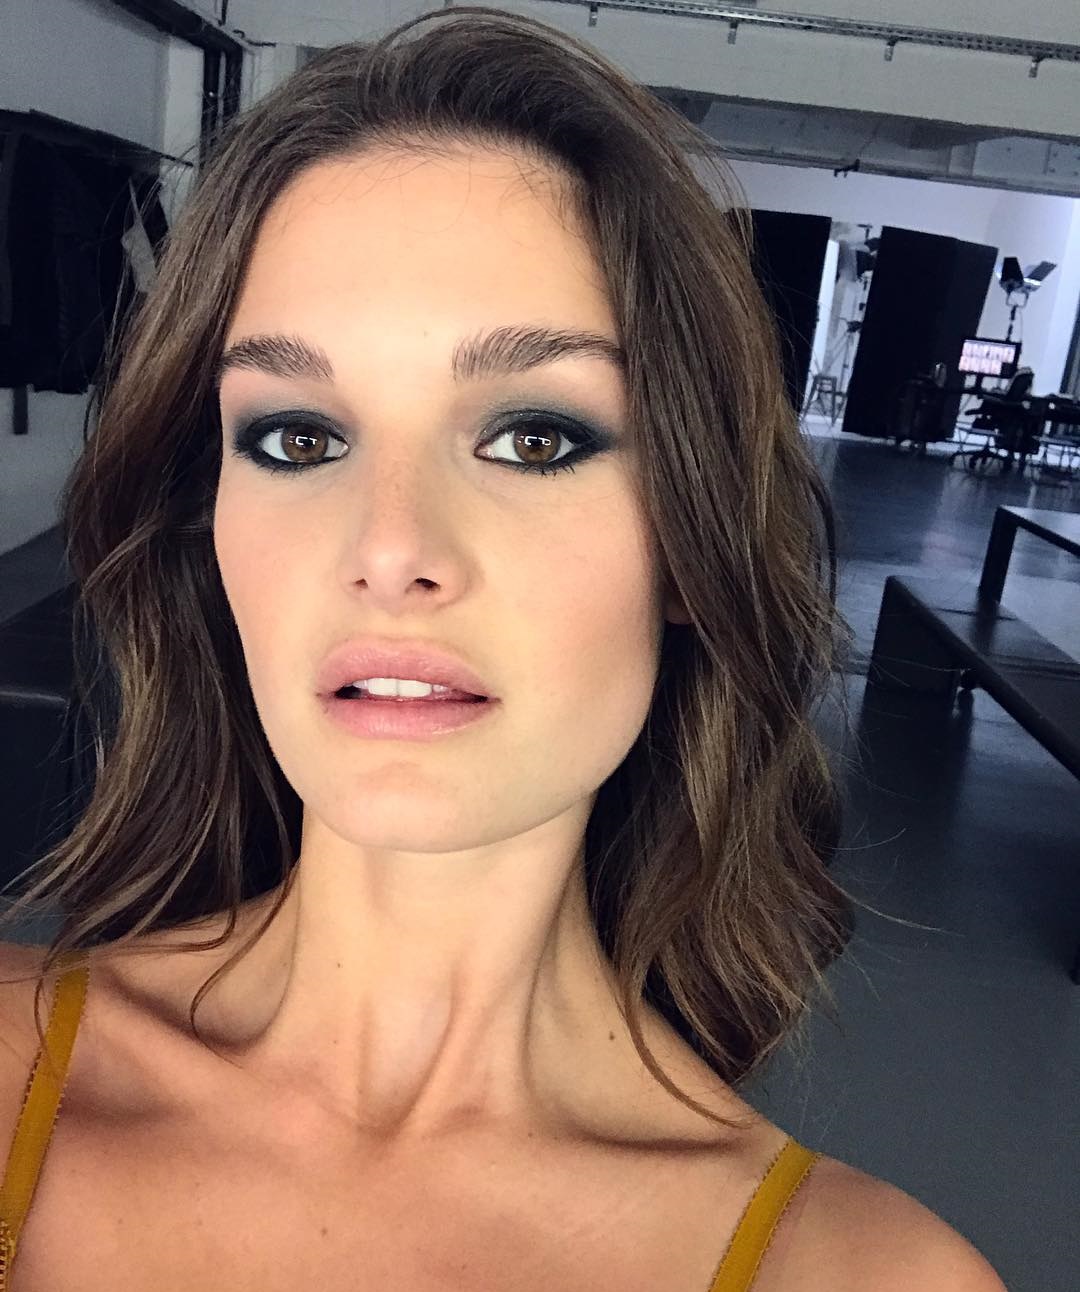 Ophelie guillermand 20 hottest pics, ophelie guillermand 20 instagram